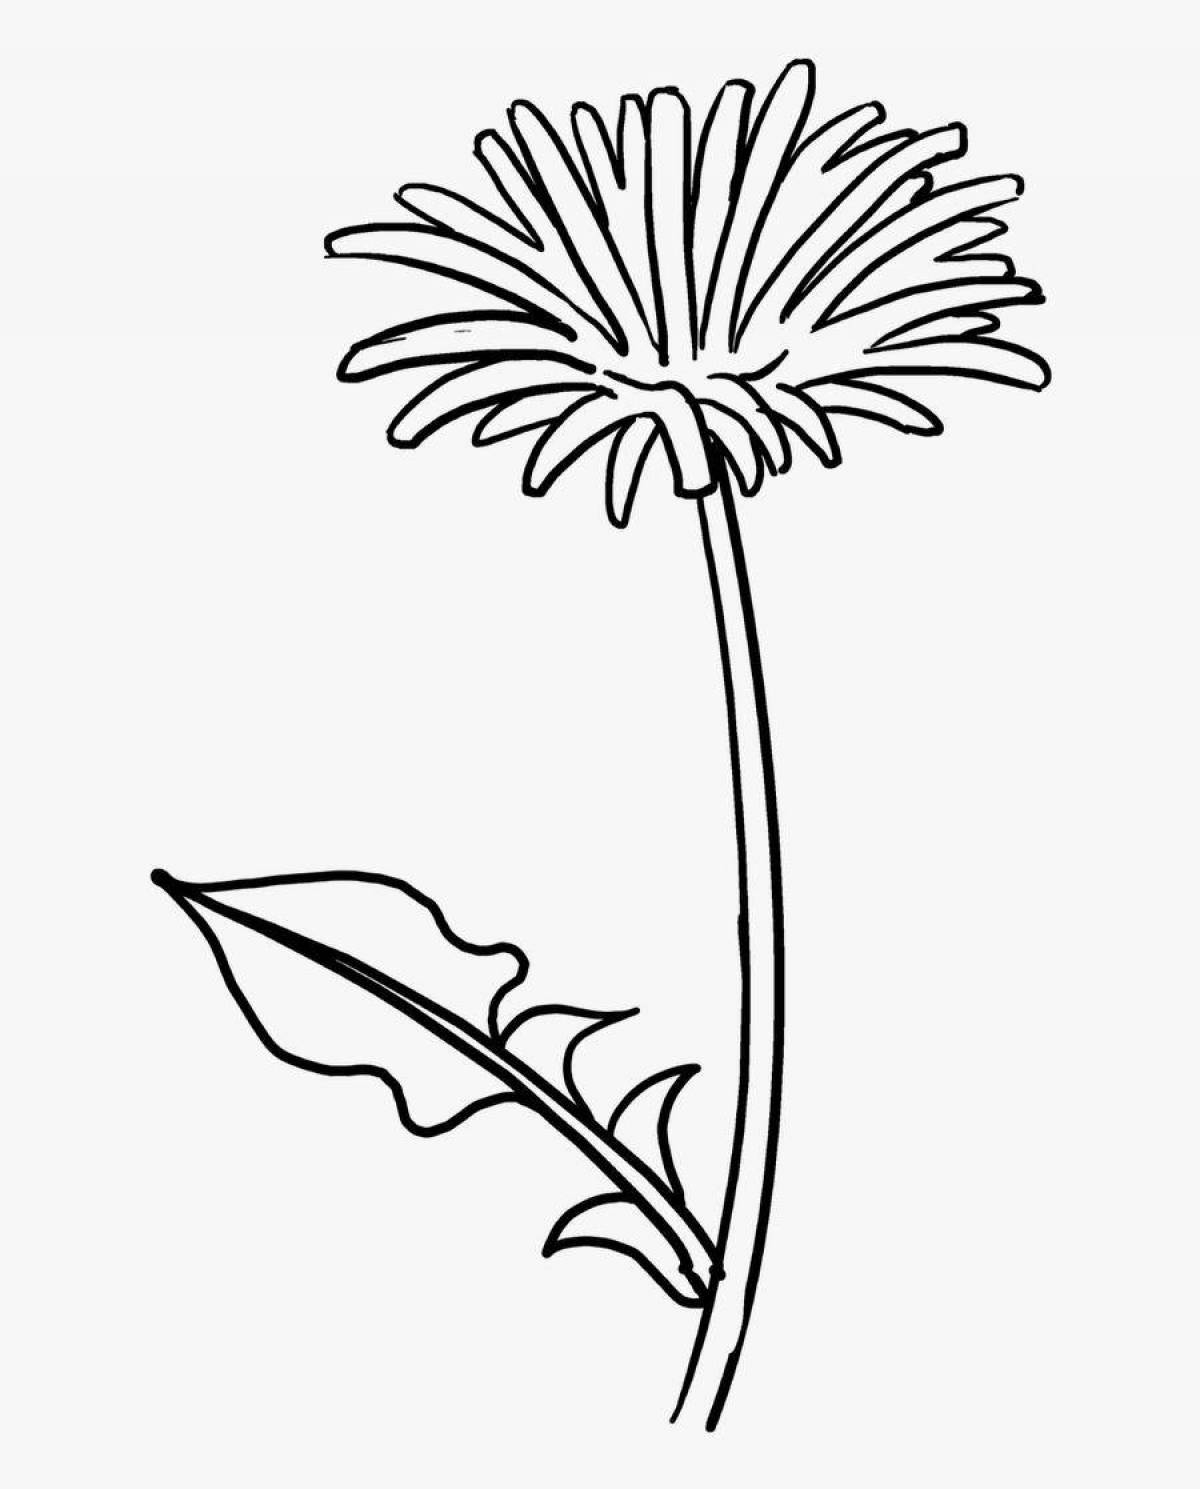 Awesome dandelion coloring pages for kids